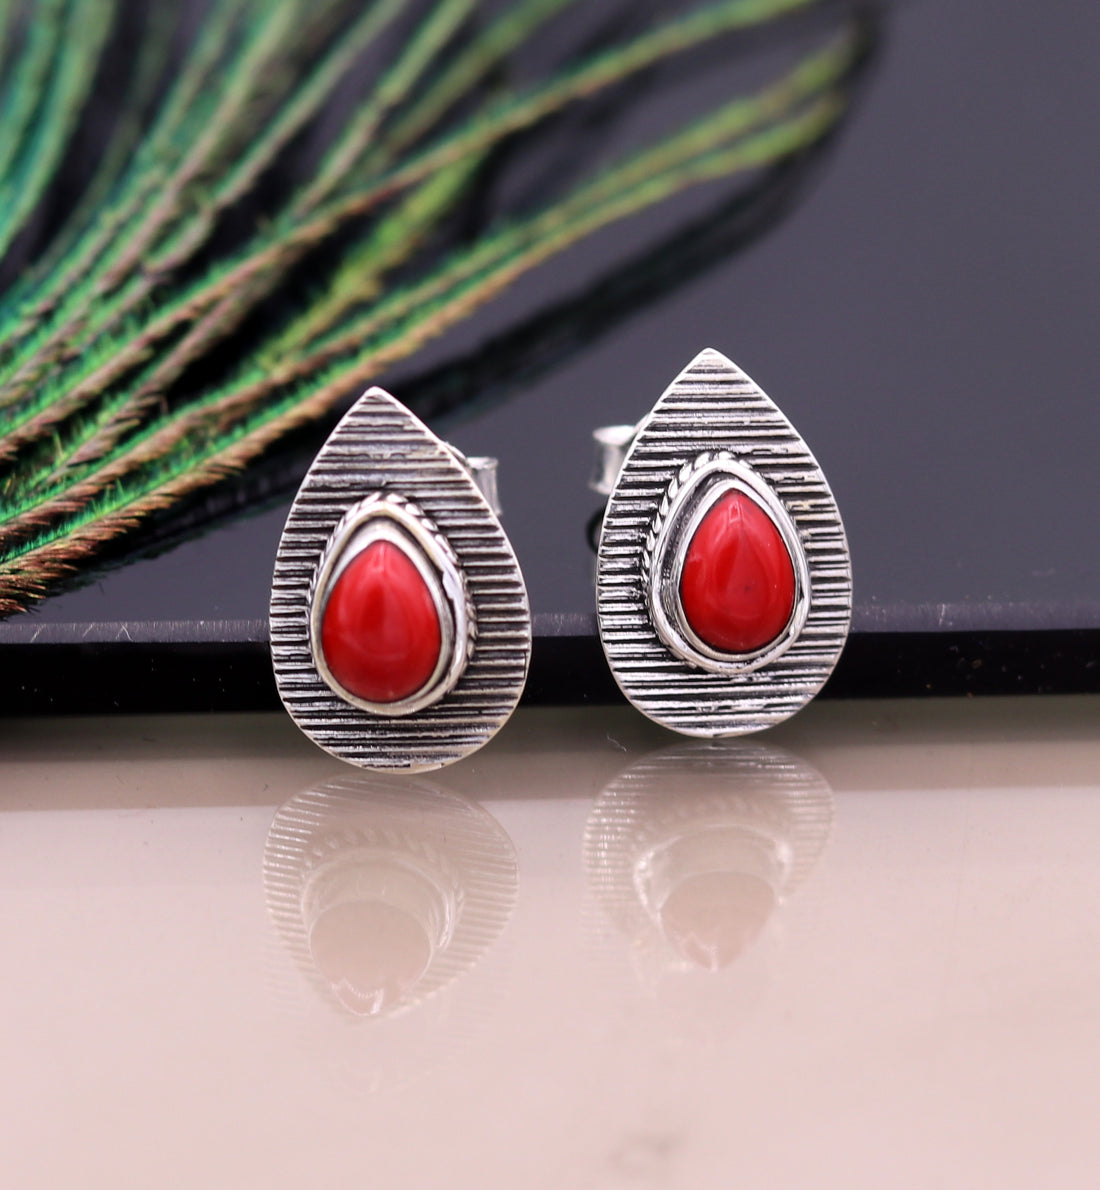 SAPPHIRE RED COLOR STONE HANDMADE 925 STERLING SILVER STUD VINTAGE EARRINGS s238 - TRIBAL ORNAMENTS